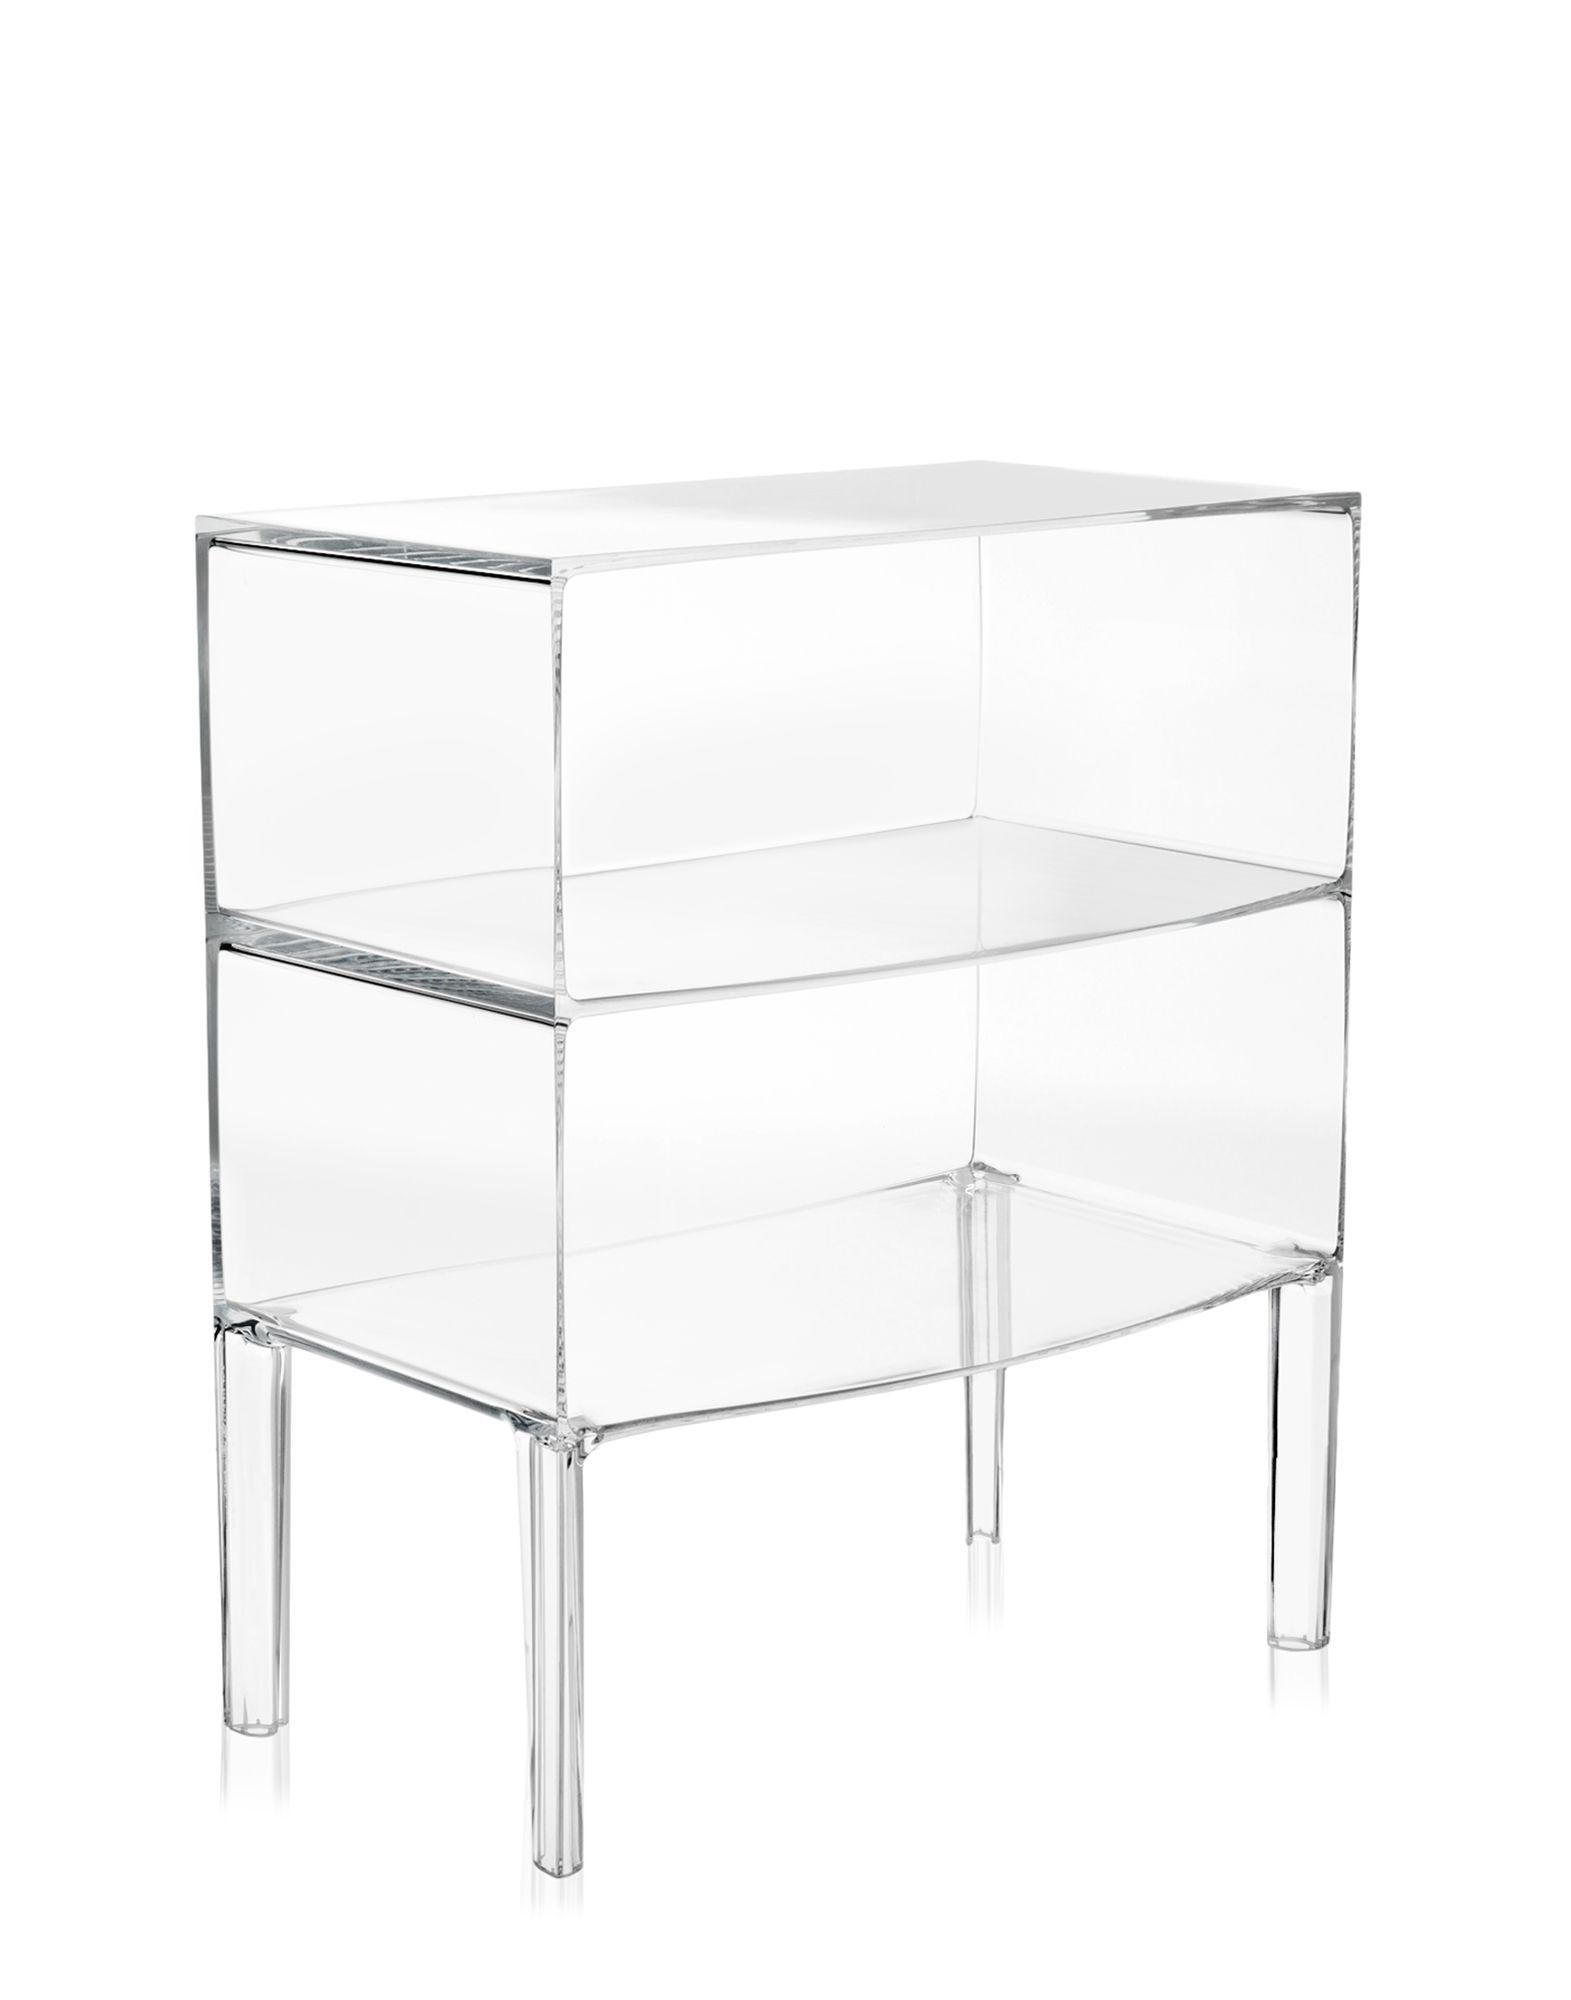 The Kartell catalogue adds yet another piece to its furniture collection, the commode. Starck has revamped it and the Kartell-style commode evokes the lines of Classic furniture while its transparency and plastic material give it a contemporary